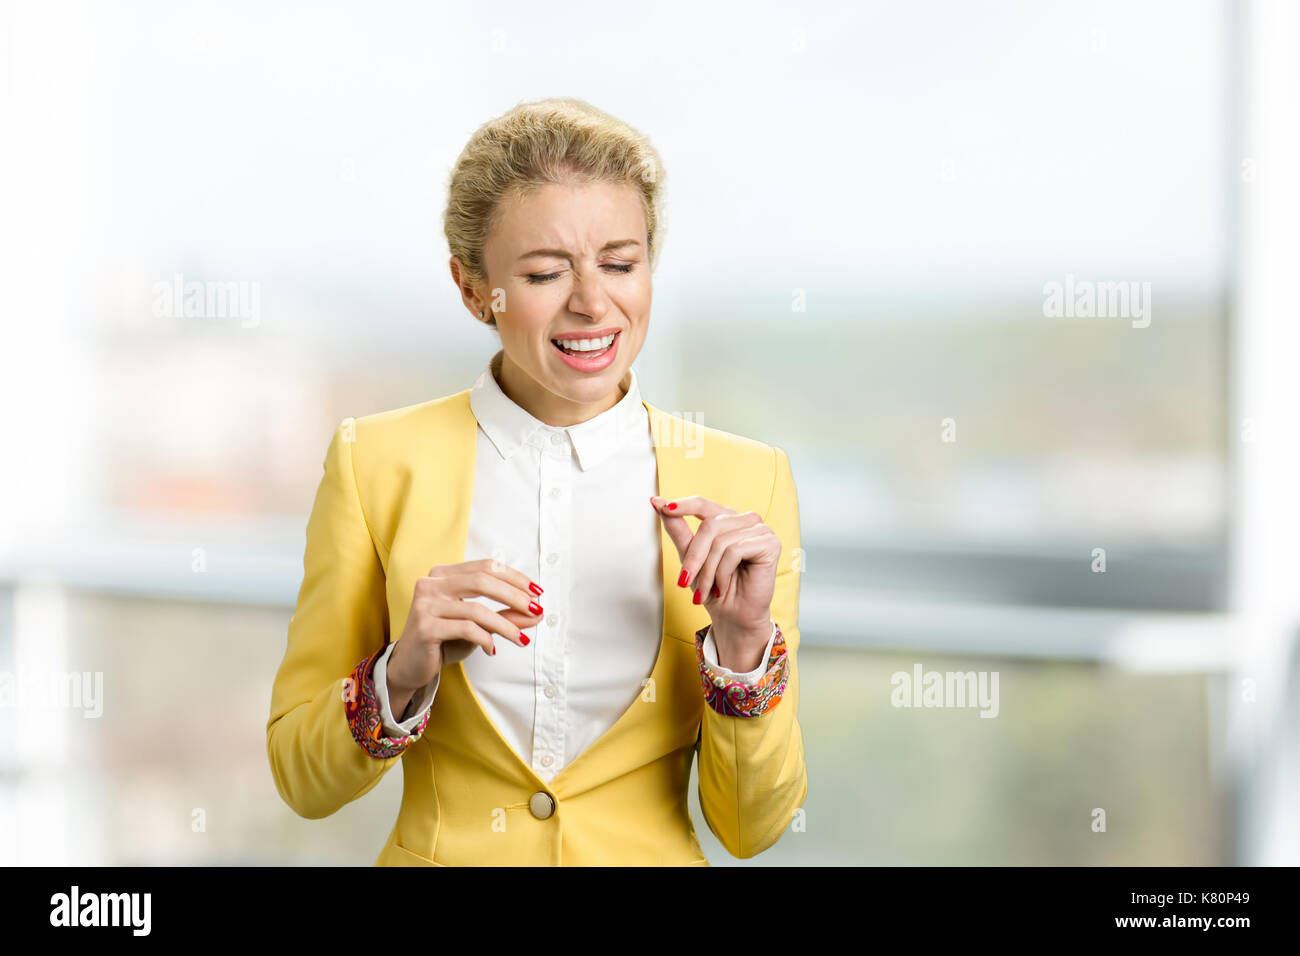 Portrait of young emotional woman singing. Stock Photo